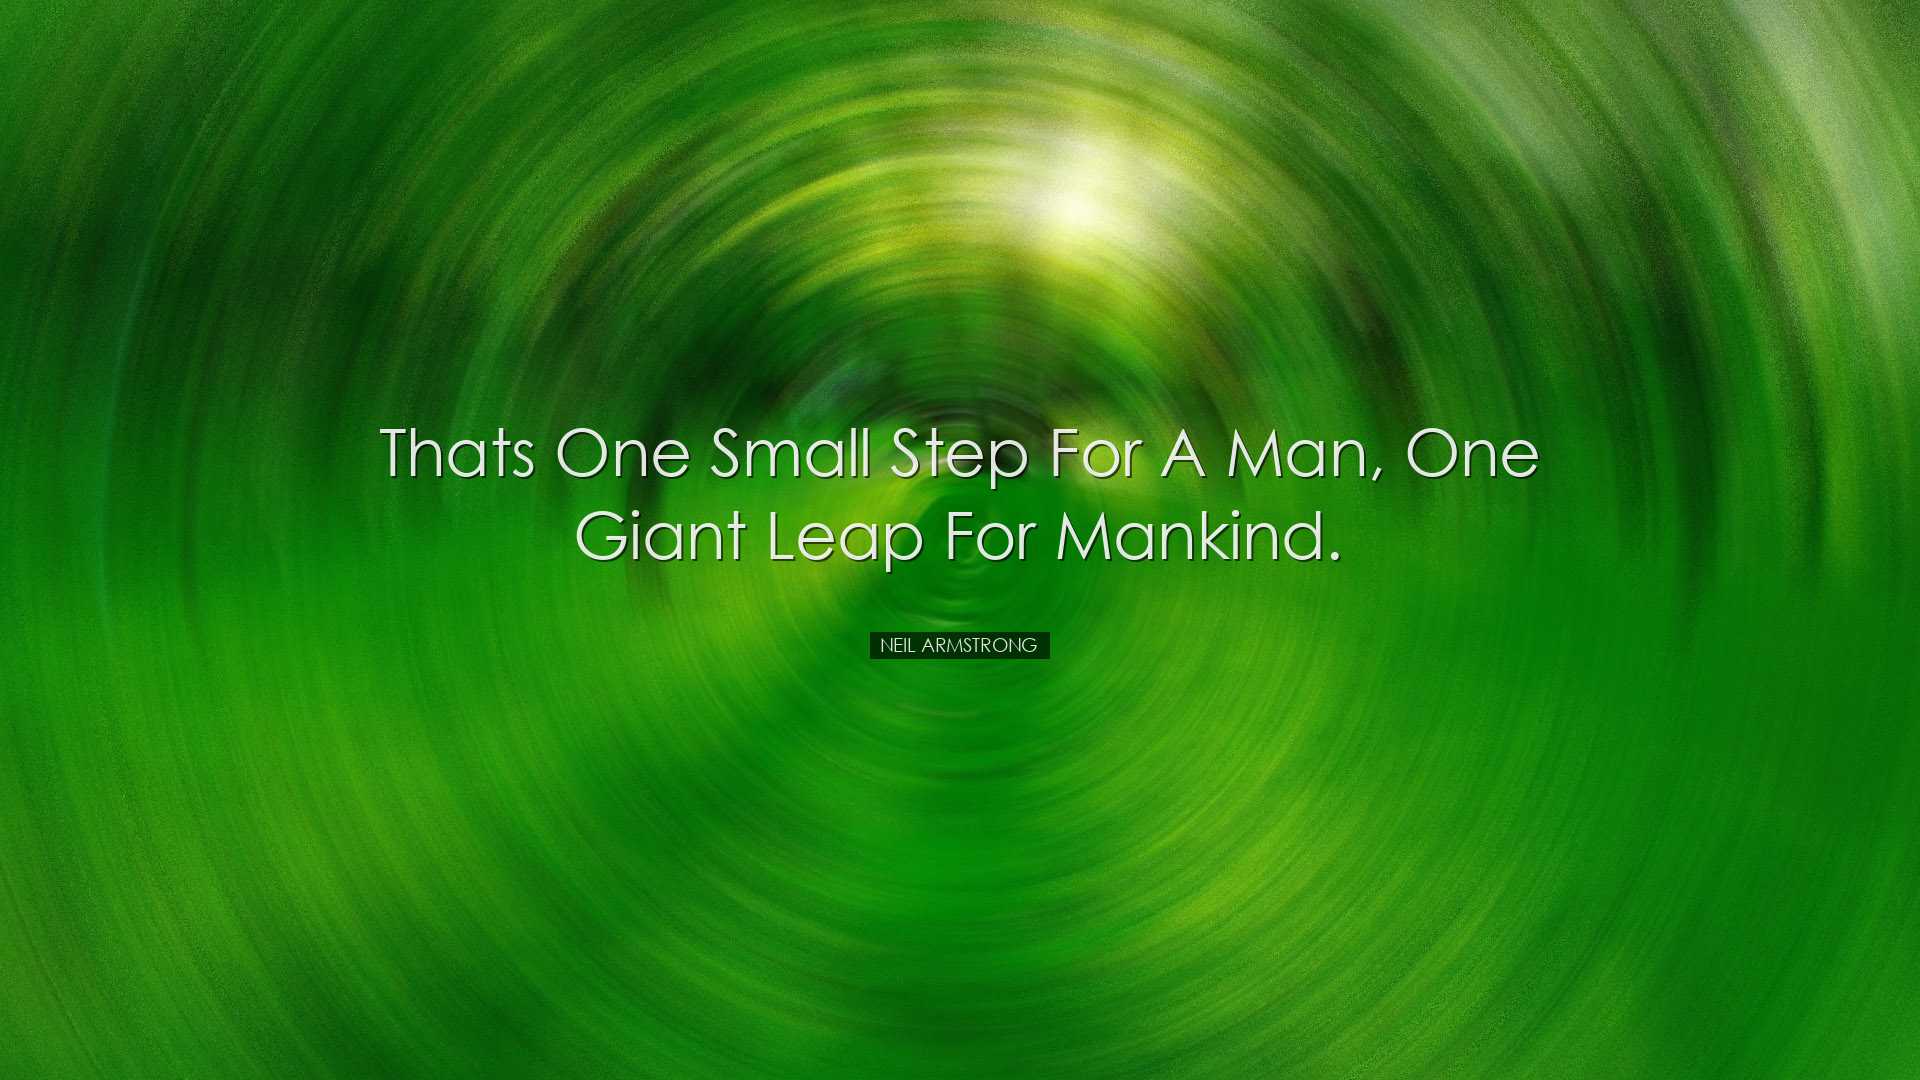 Thats one small step for a man, one giant leap for mankind. - Neil